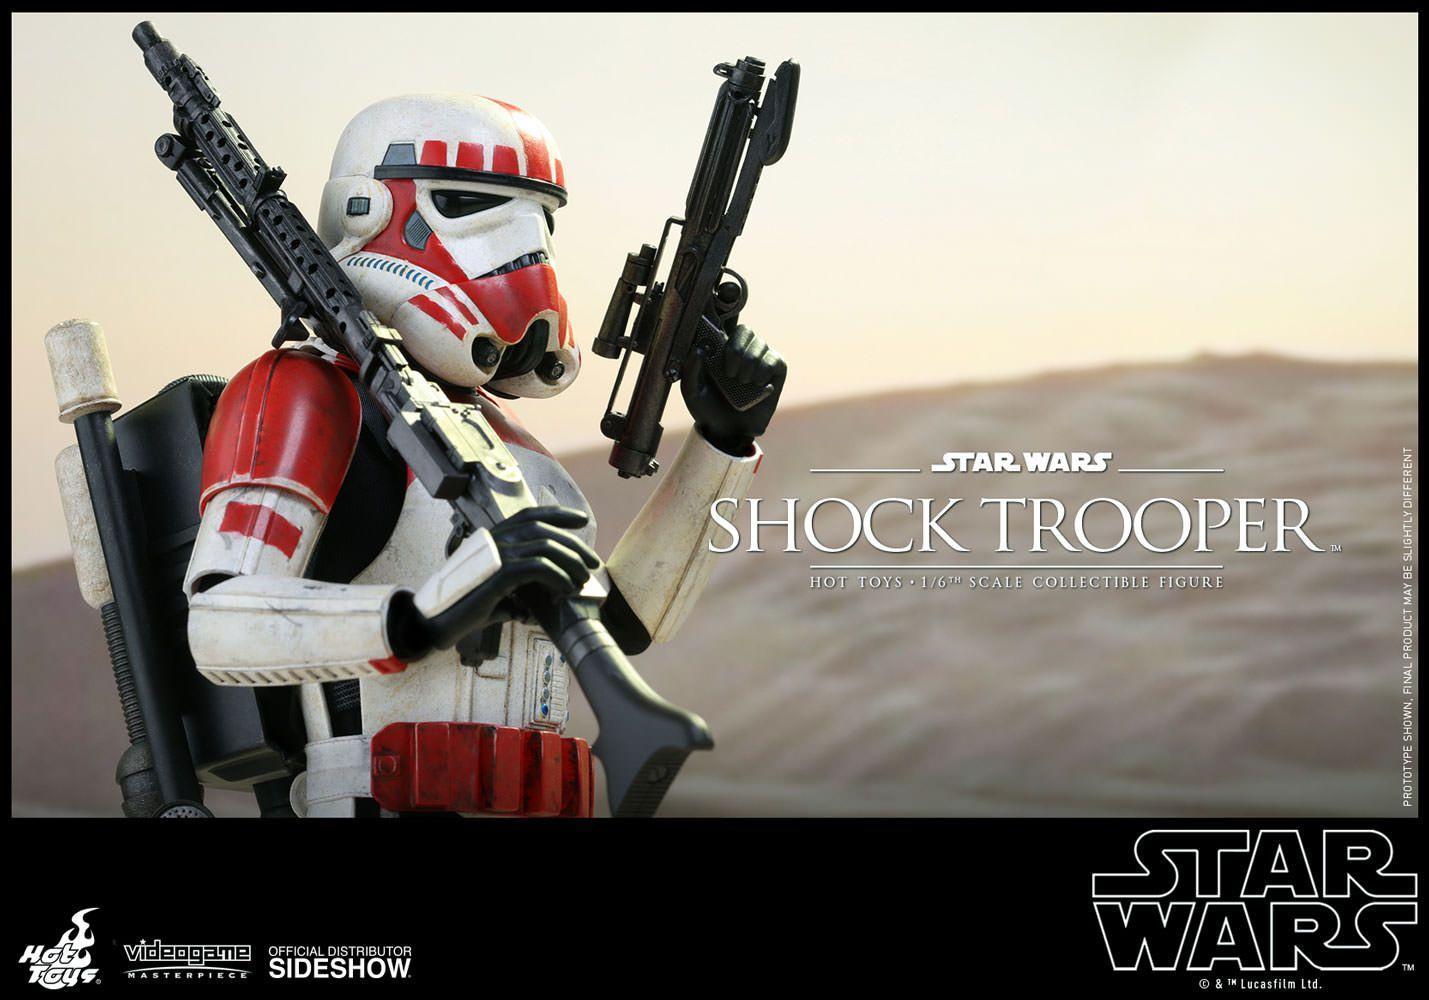 Star Wars Shock Trooper Sixth Scale Figure by Hot Toys. Sideshow